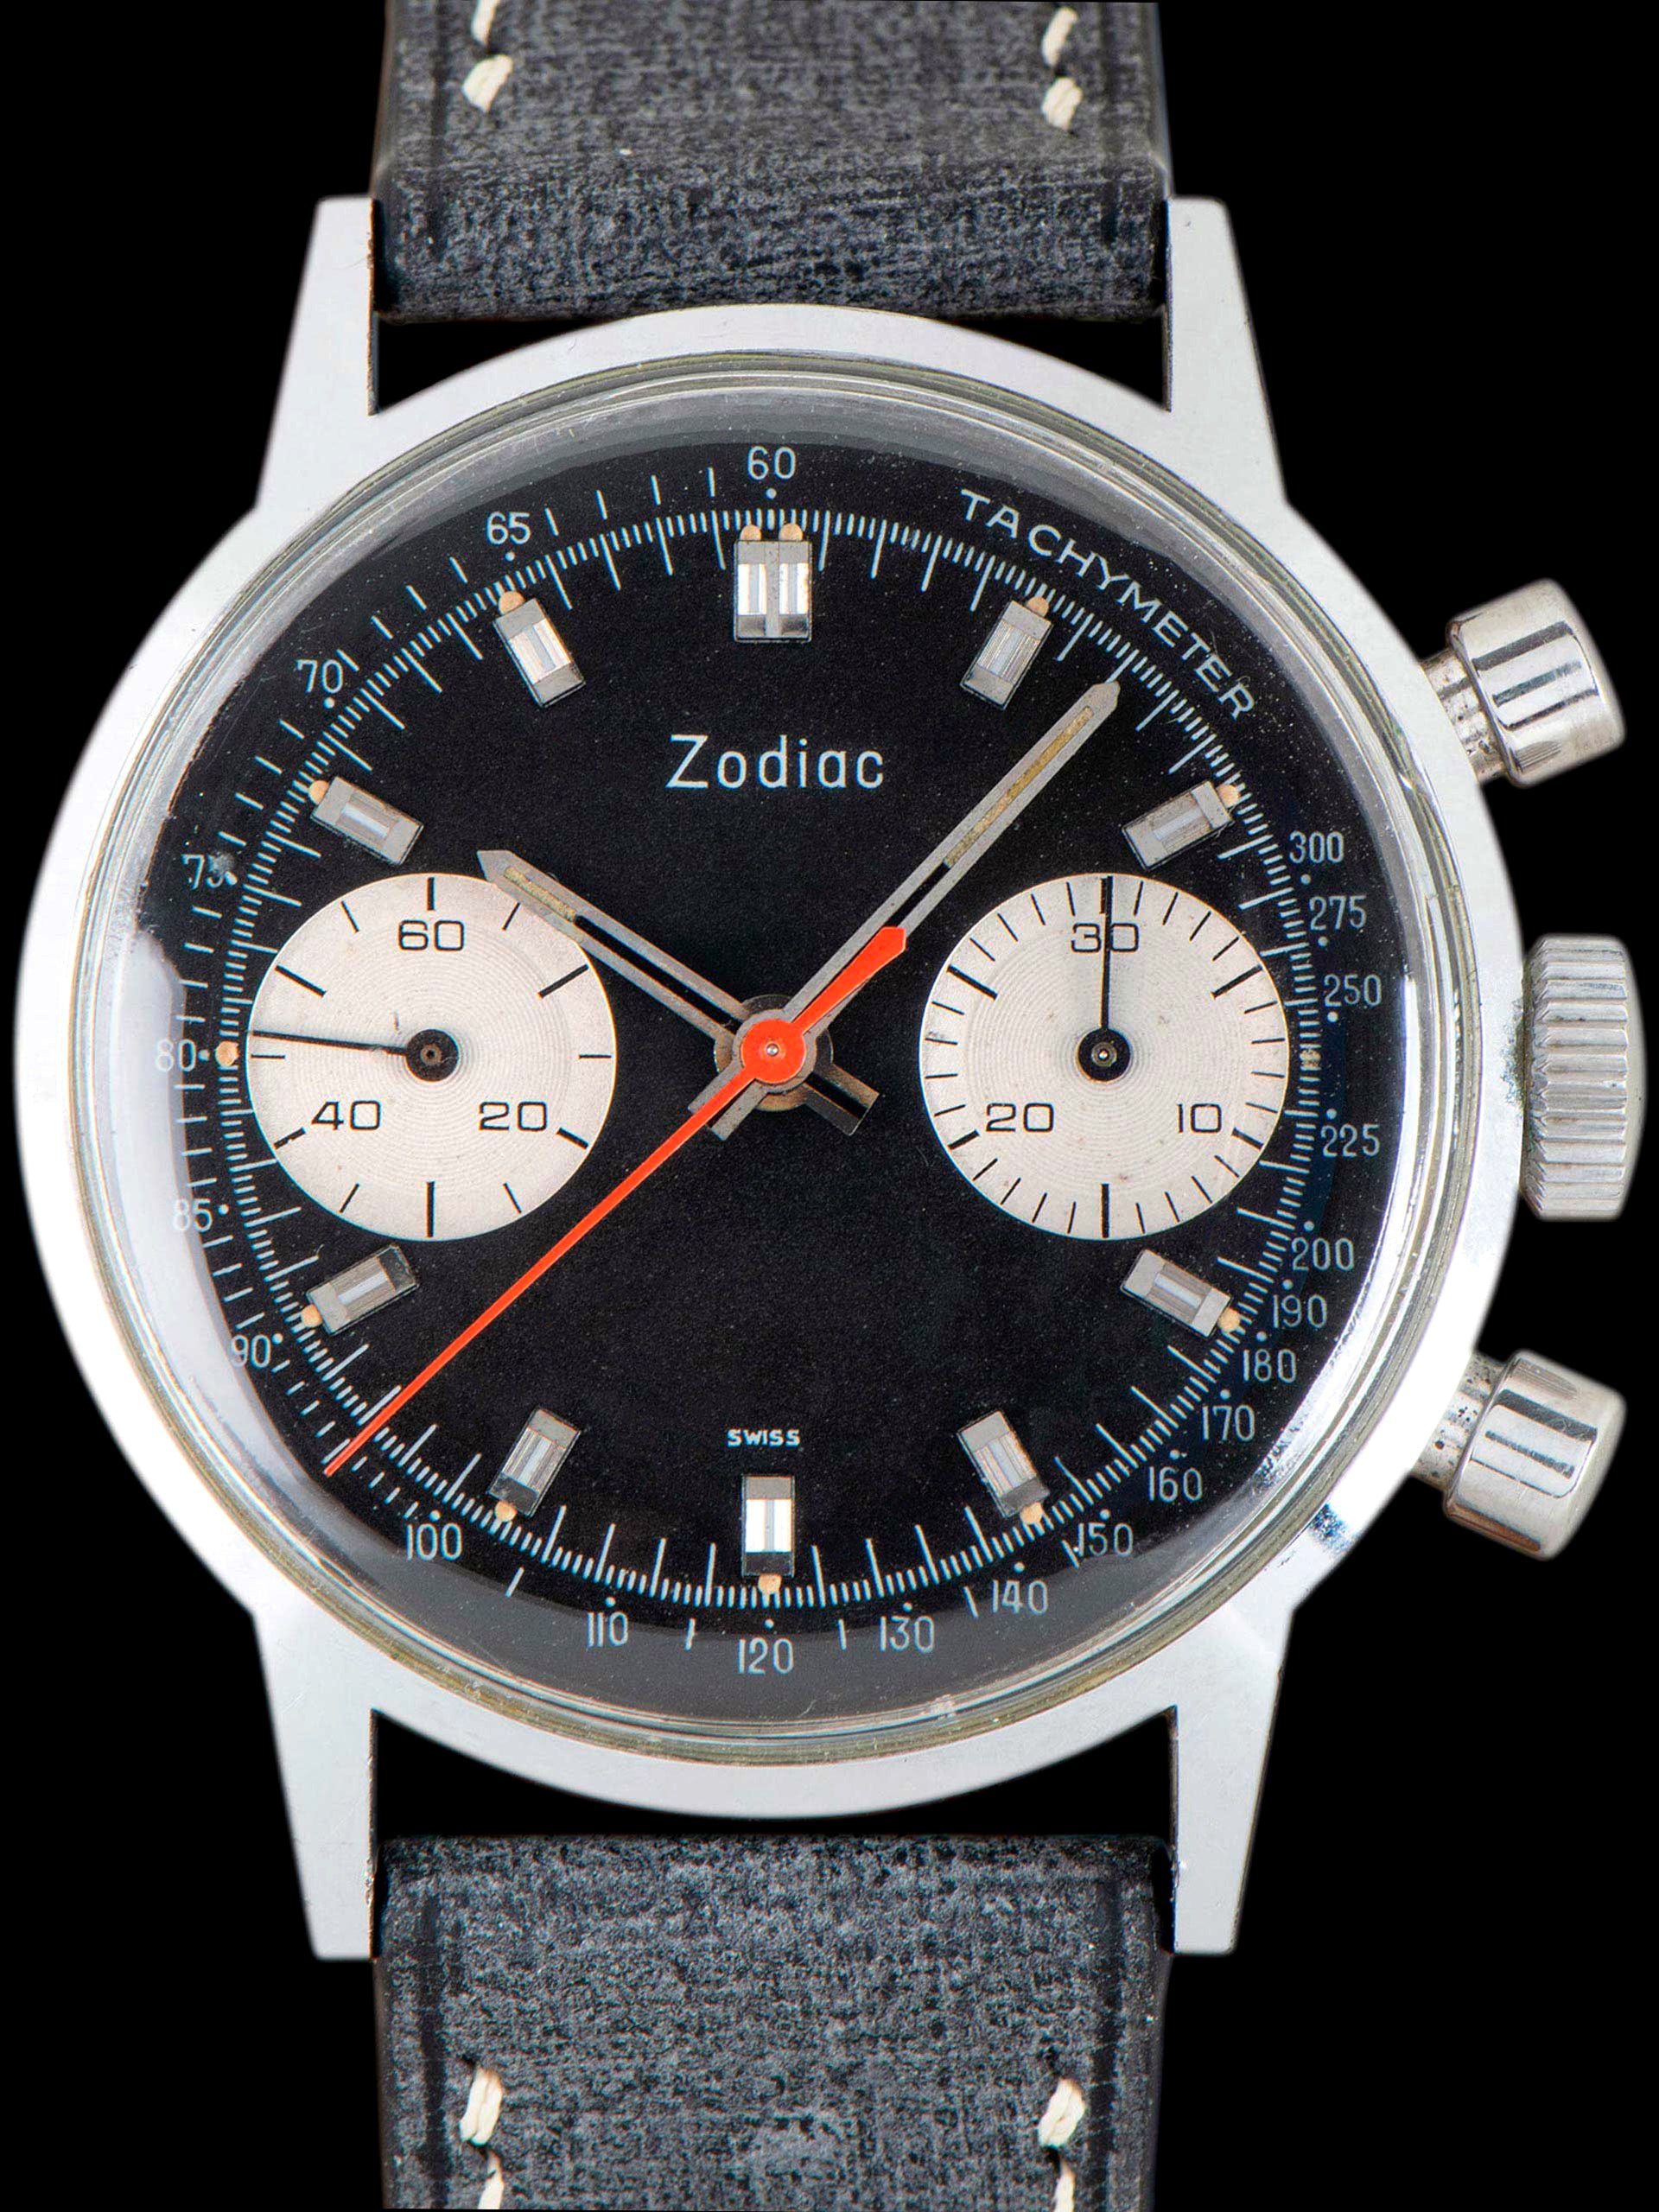 1960s Zodiac Chronograph (Ref. 73321) "Made By Heuer"